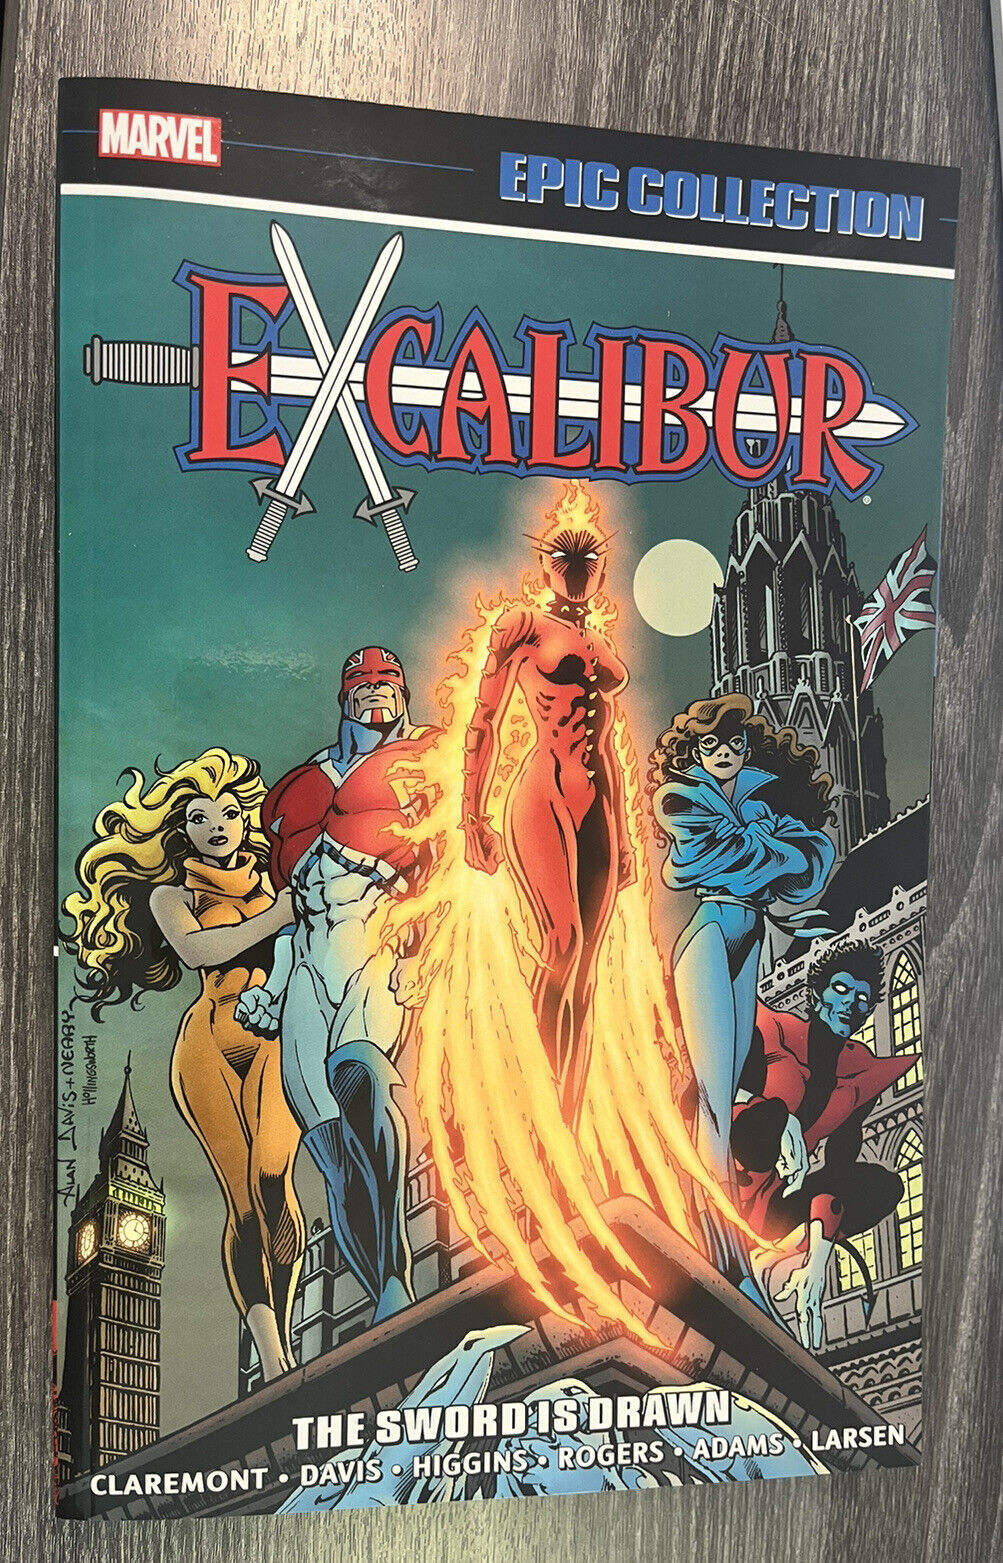 Marvel Excalibur Epic Collection Vol. 1 The Sword is Drawn TPB Graphic Novel